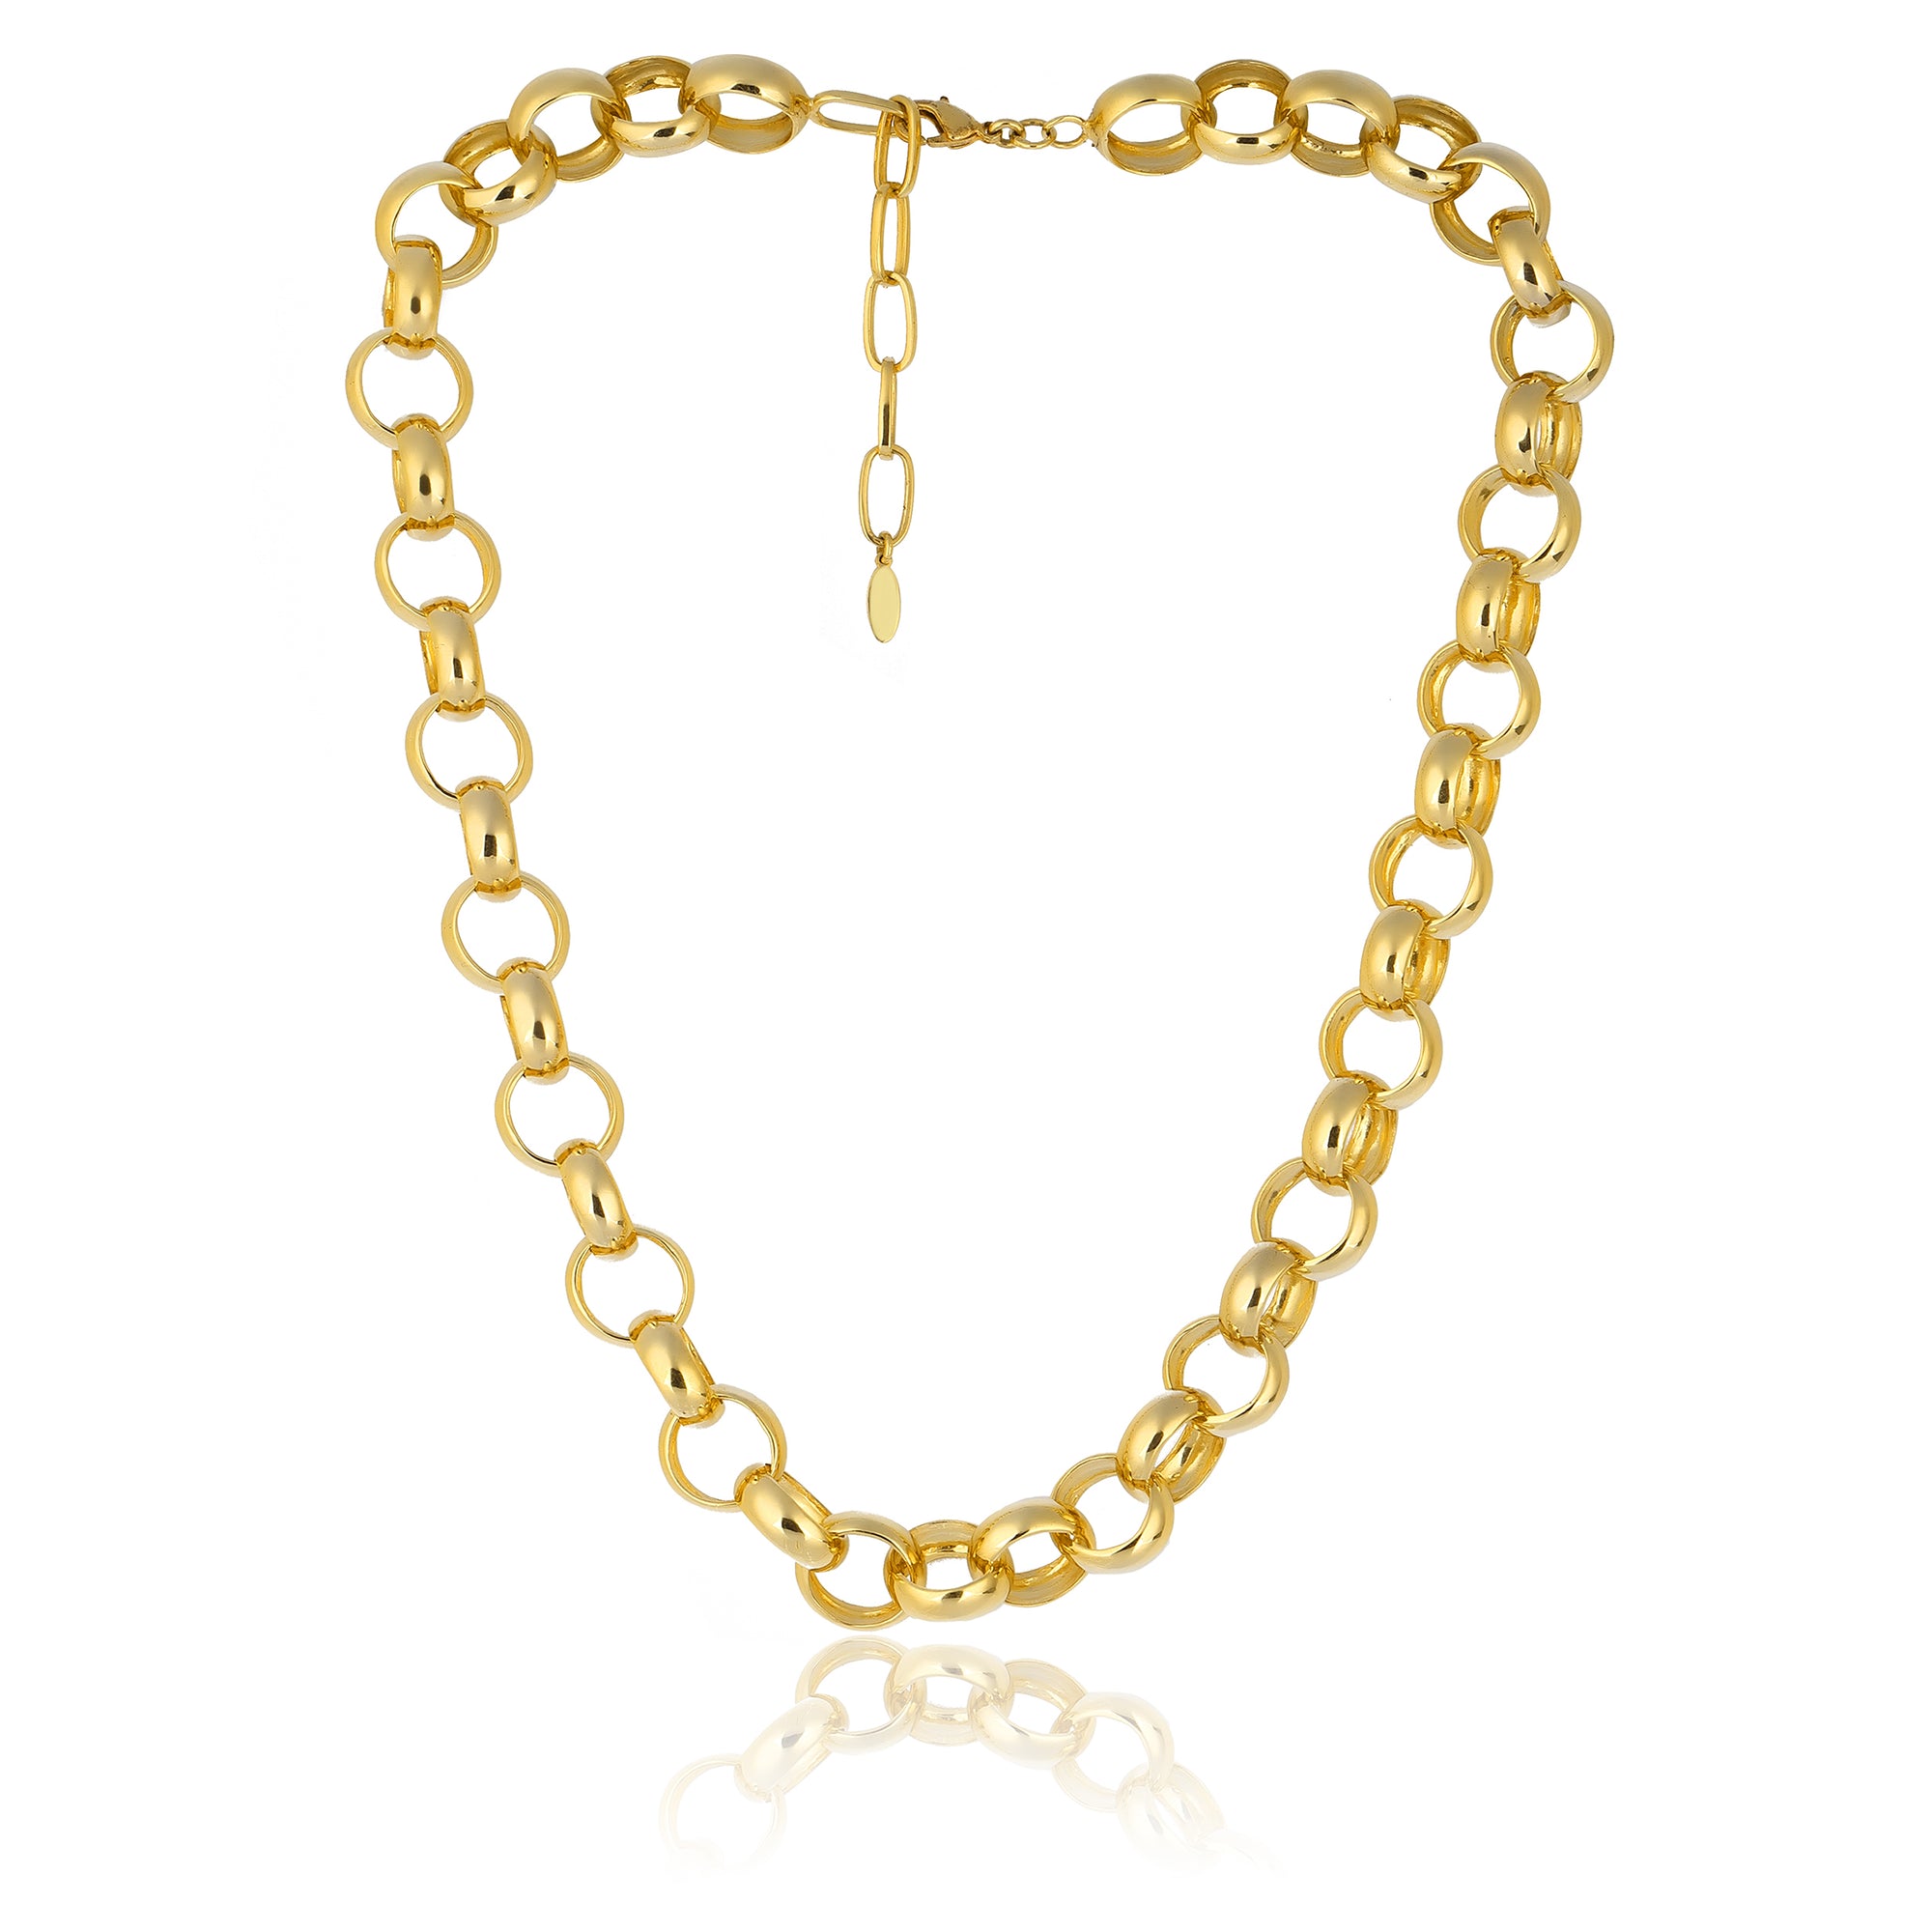 24K gold plated chain necklace costume jewelry